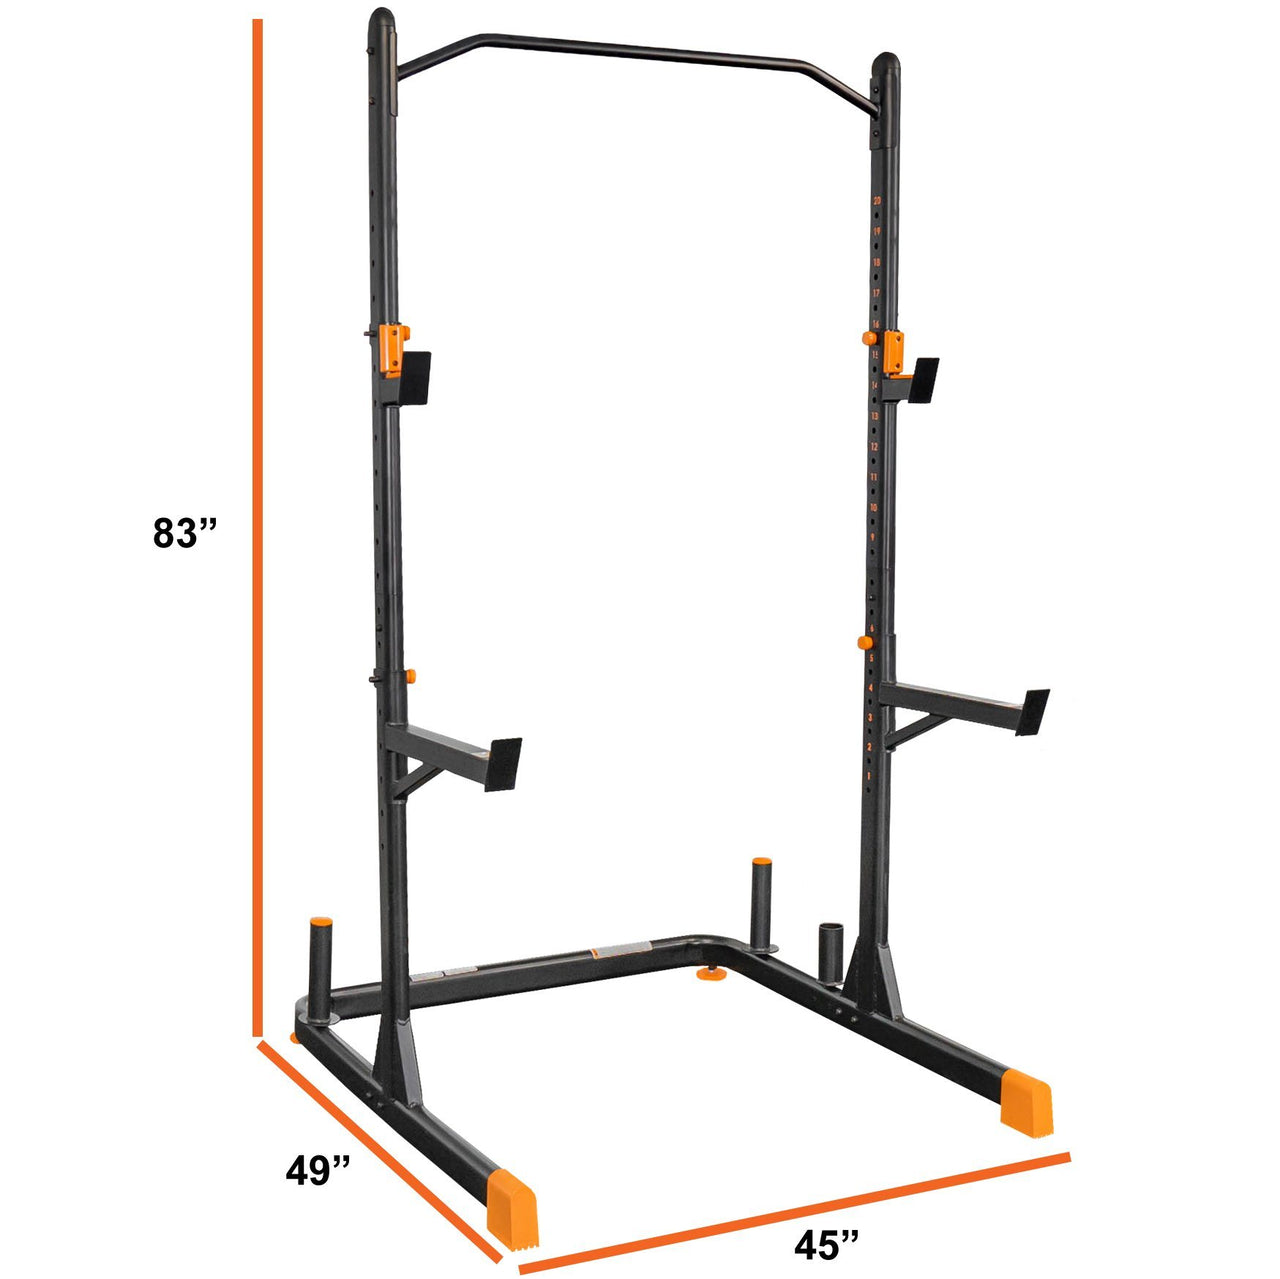 Measurements of The GRIND Fitness Alpha2000 Squat Stand